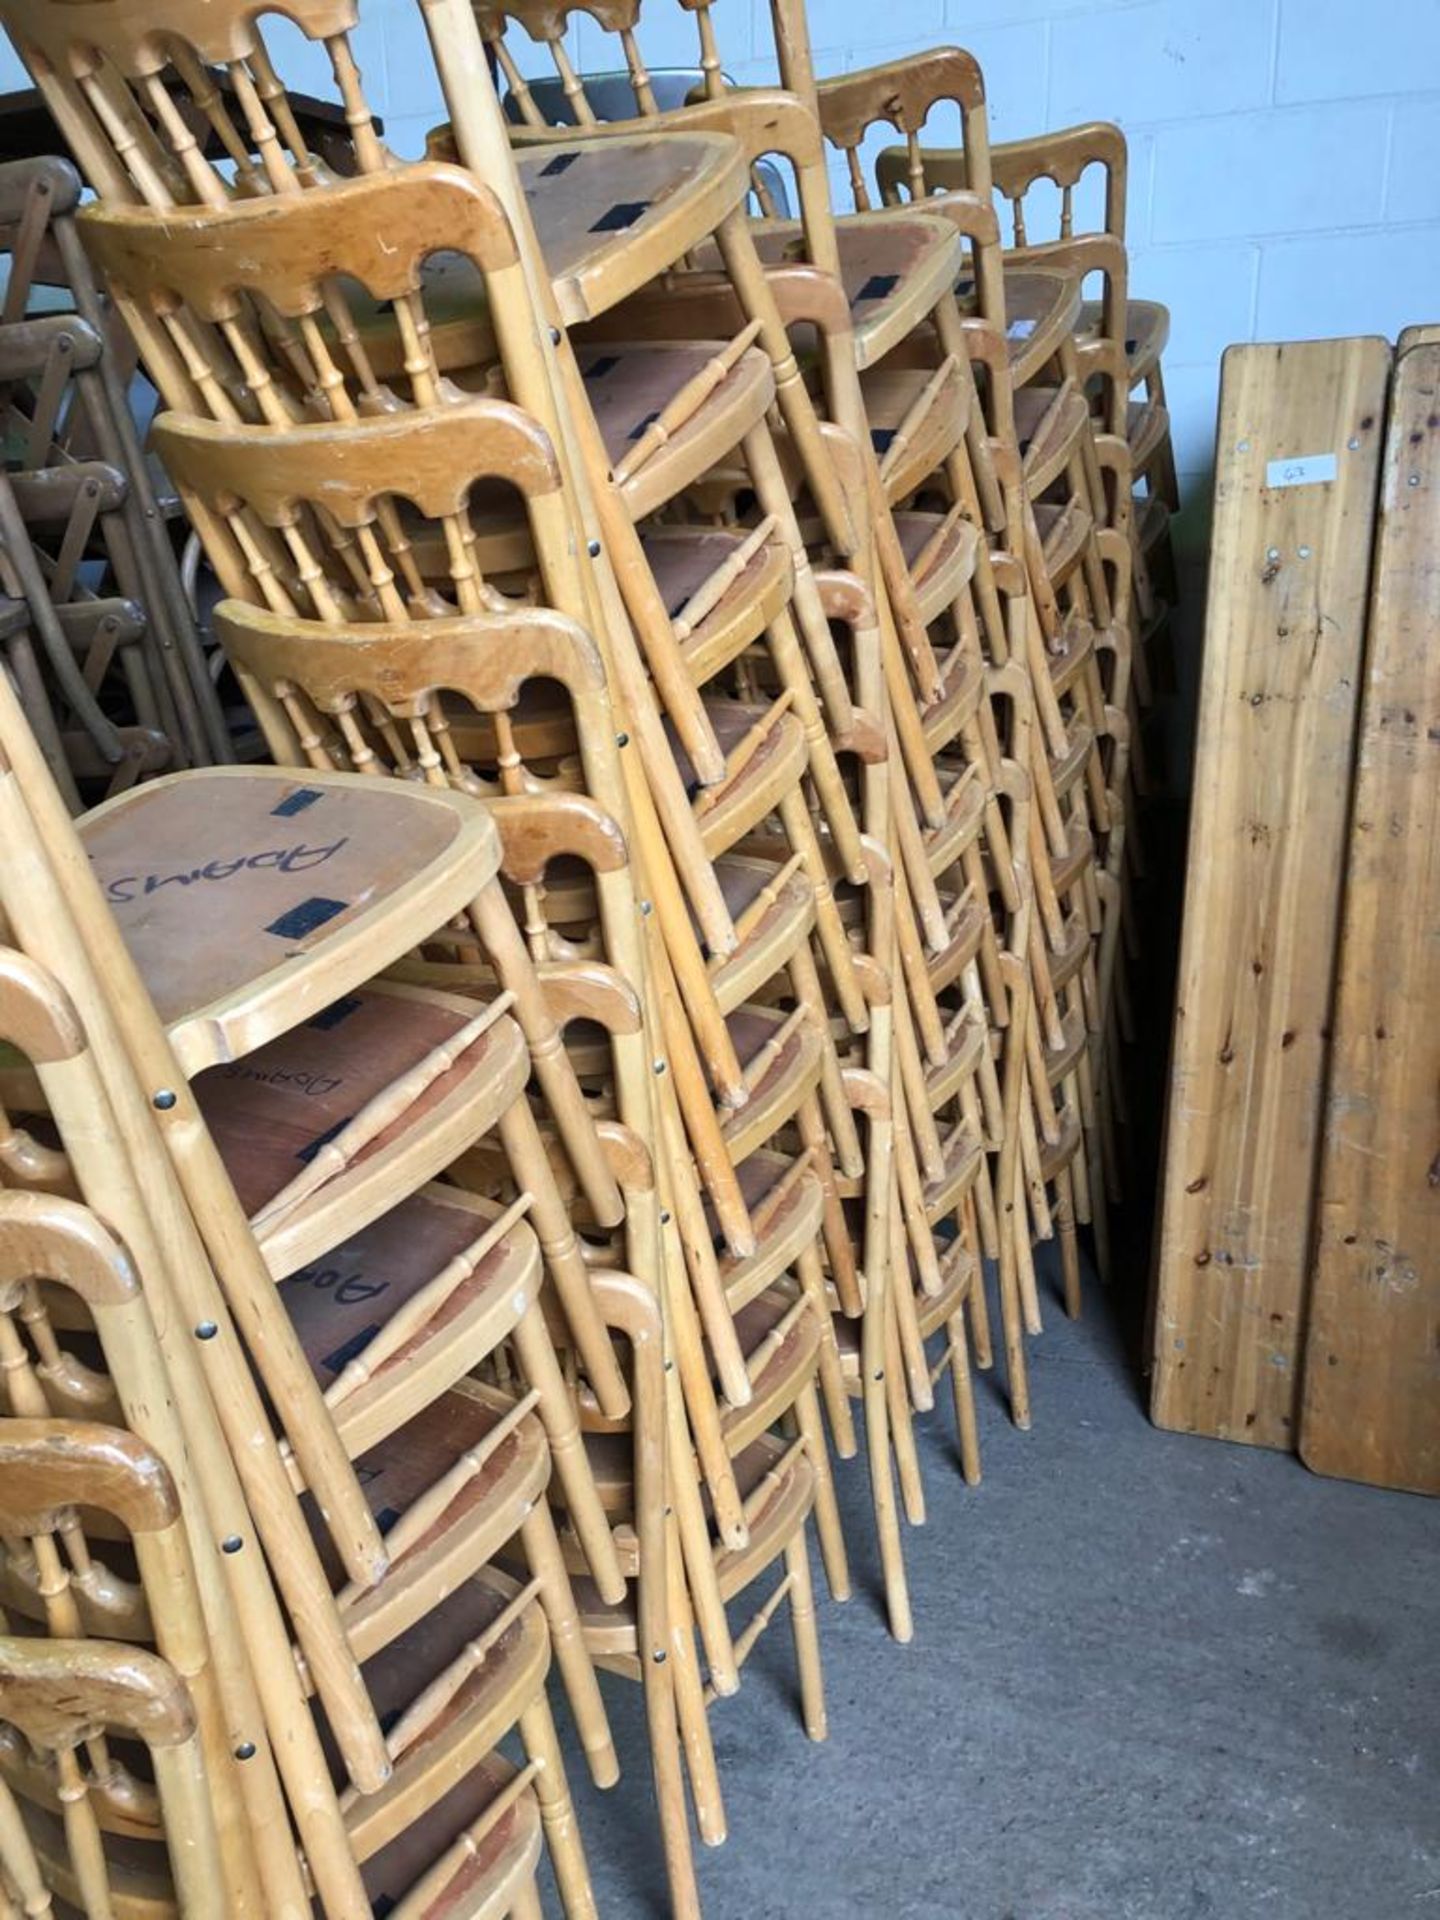 42 x Natural Banqueting Chairs - No Pads Collection From Grantham NG32 2AG on 19th and 20th May 10am